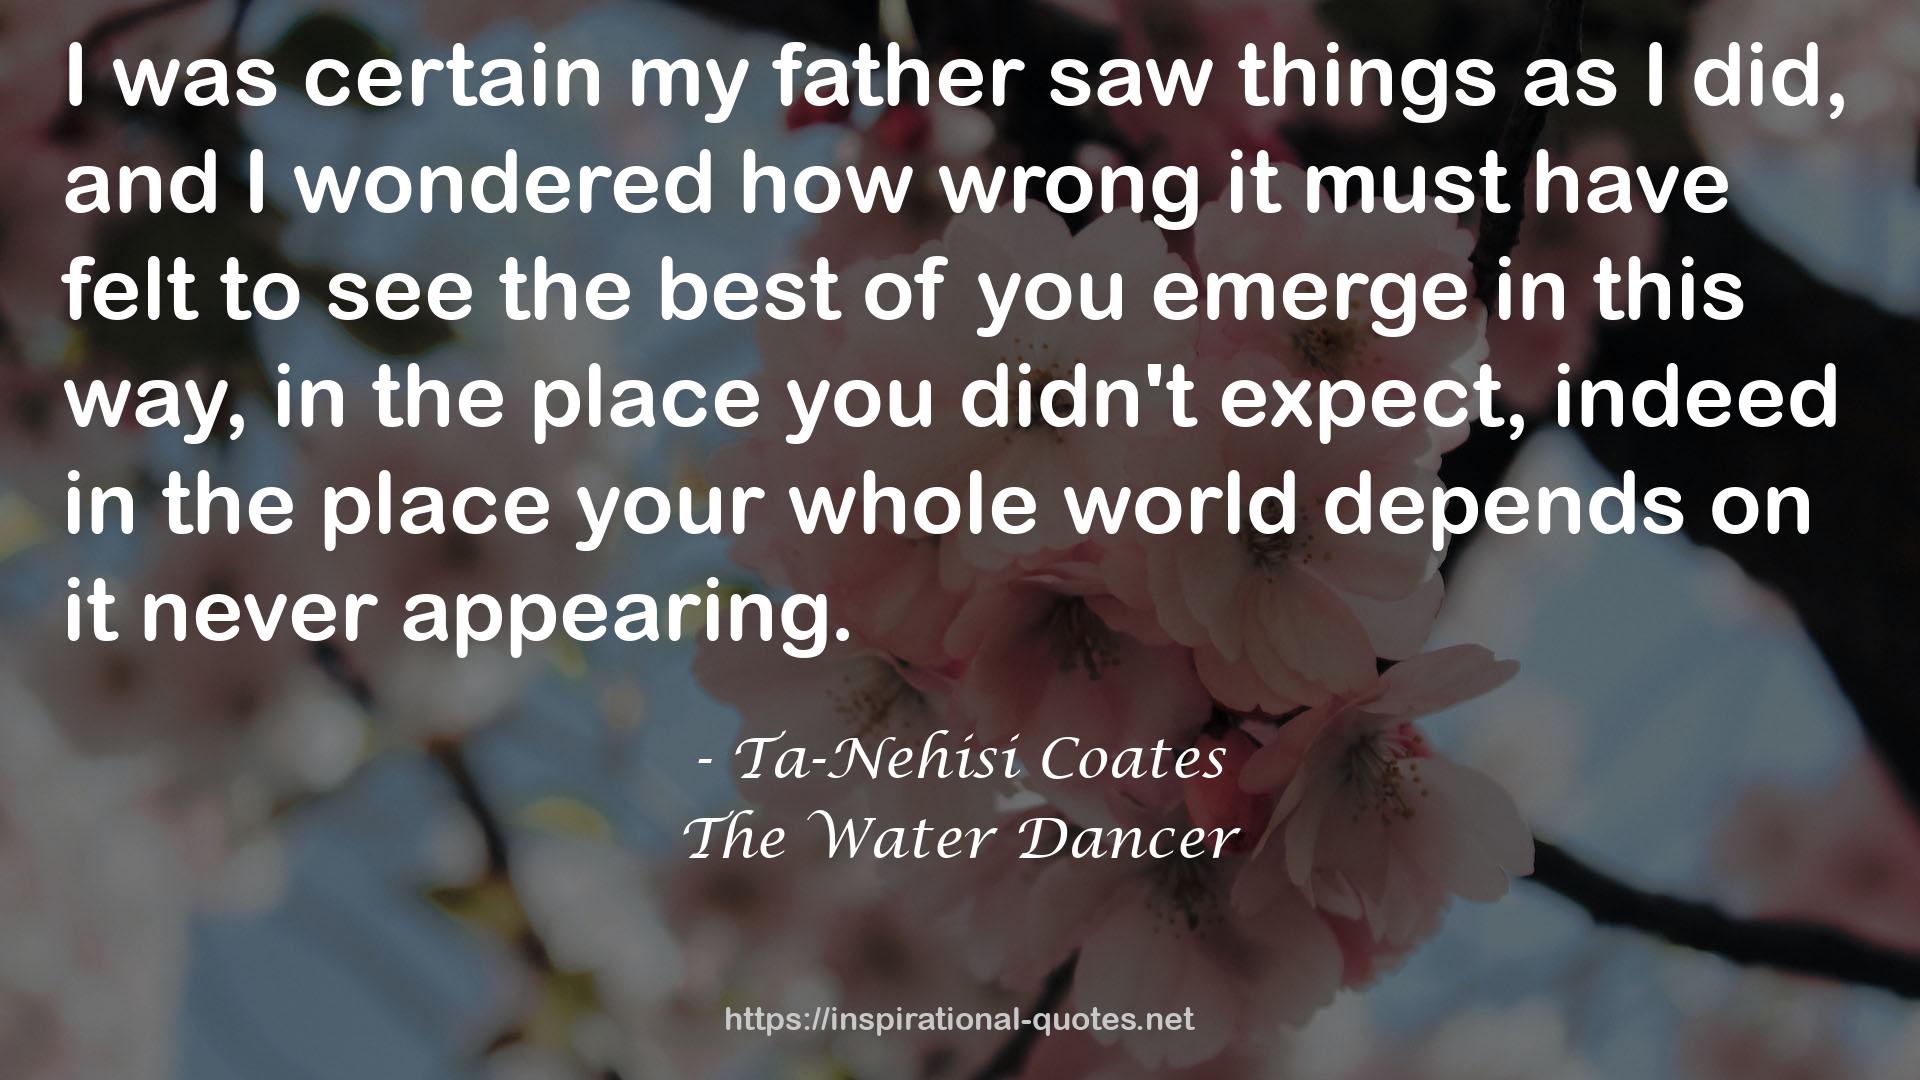 The Water Dancer QUOTES